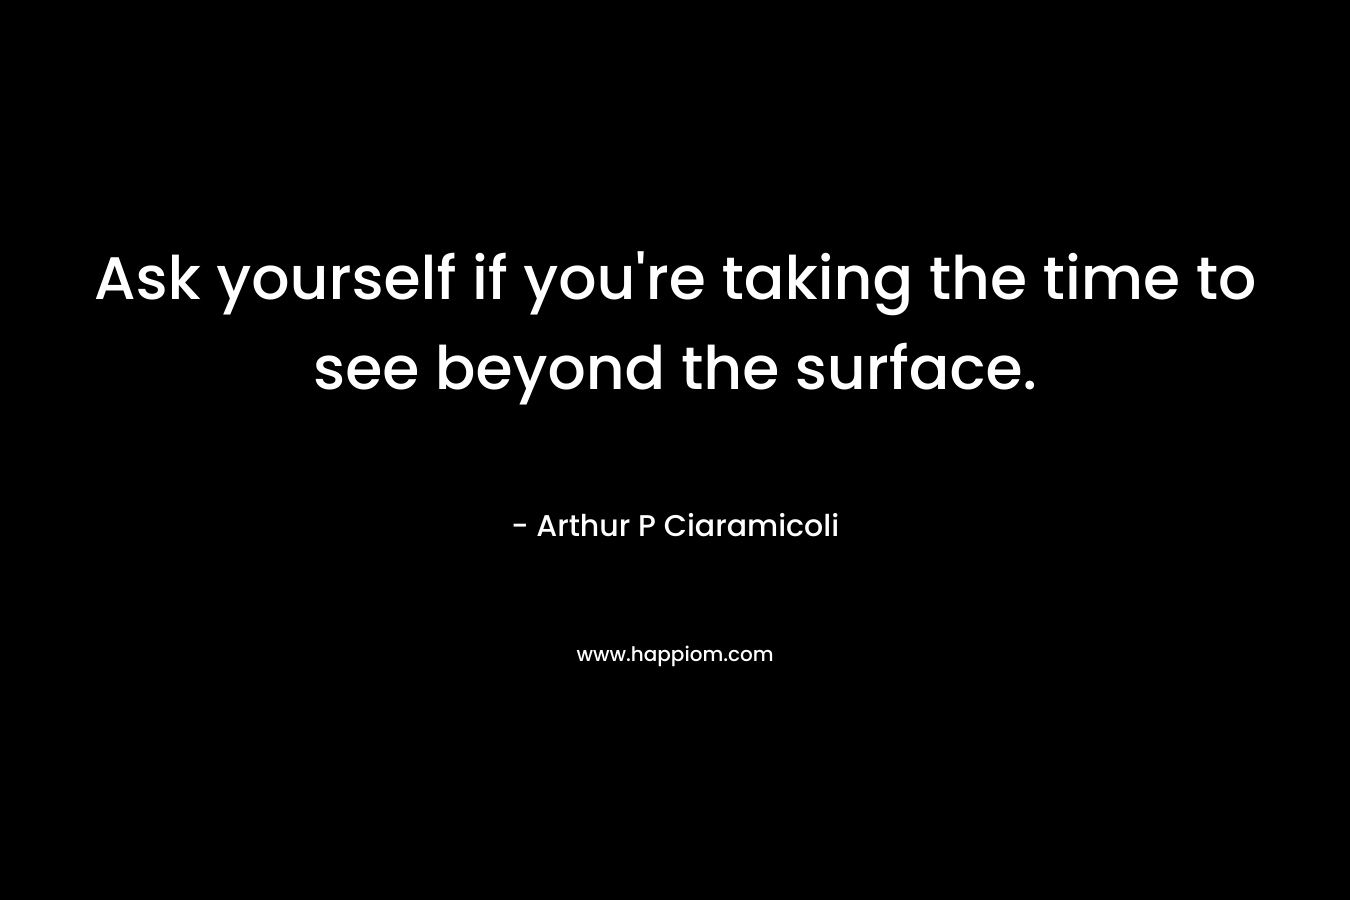 Ask yourself if you're taking the time to see beyond the surface.